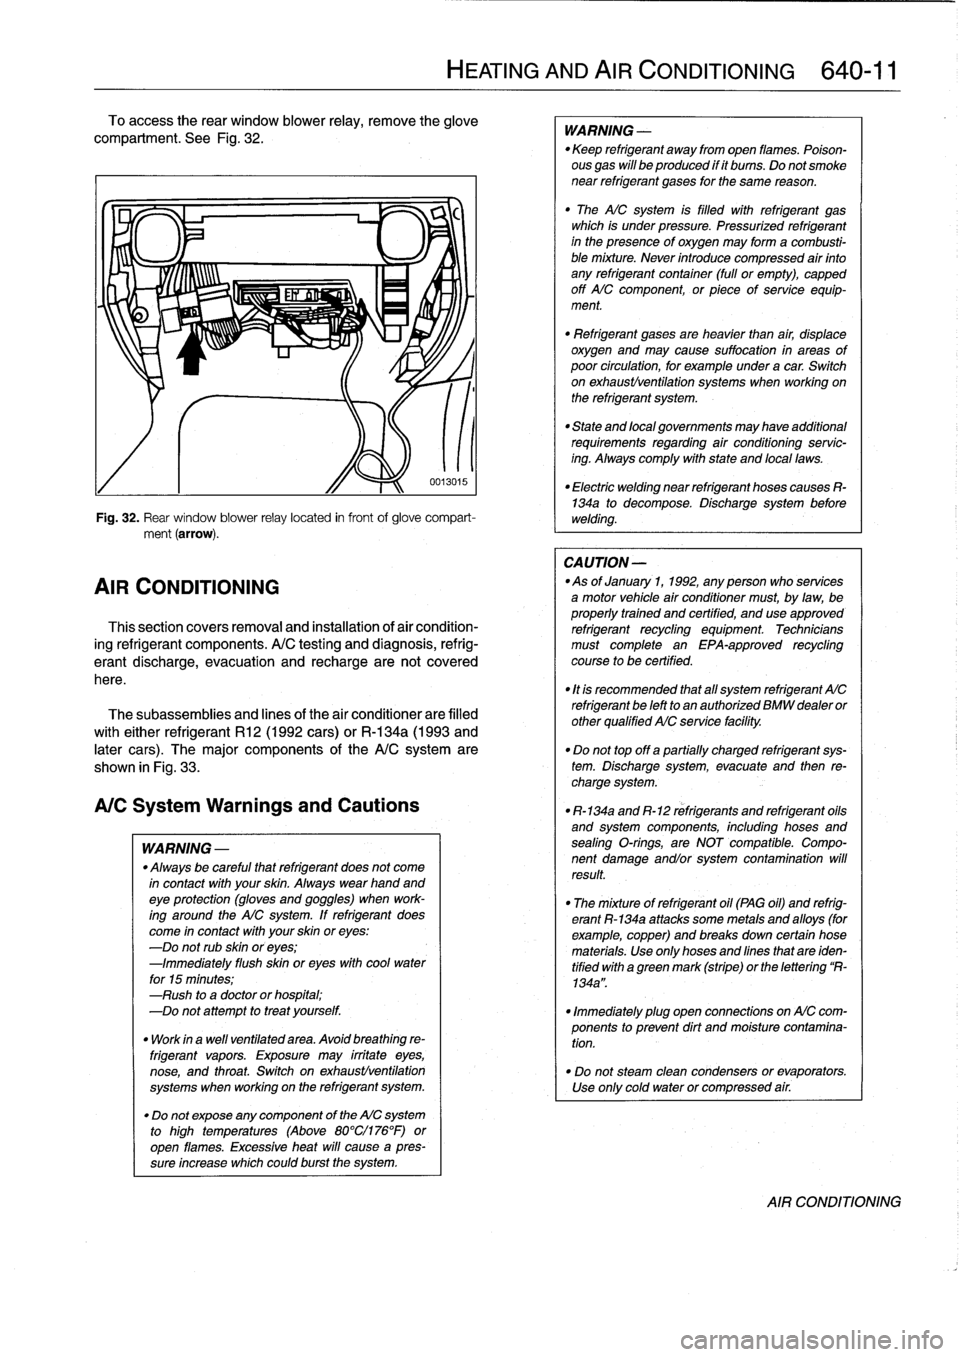 BMW 328i 1998 E36 Owners Manual To
access
the
rear
window
blower
relay,
remove
the
glove
compariment
.
See
Fig
.
32
.

Fig
.
32
.
Rear
window
blower
relay
located
in
frontof
glove
compart-
ment
(arrow)
.

AIR
CONDITIONING

Thissecti